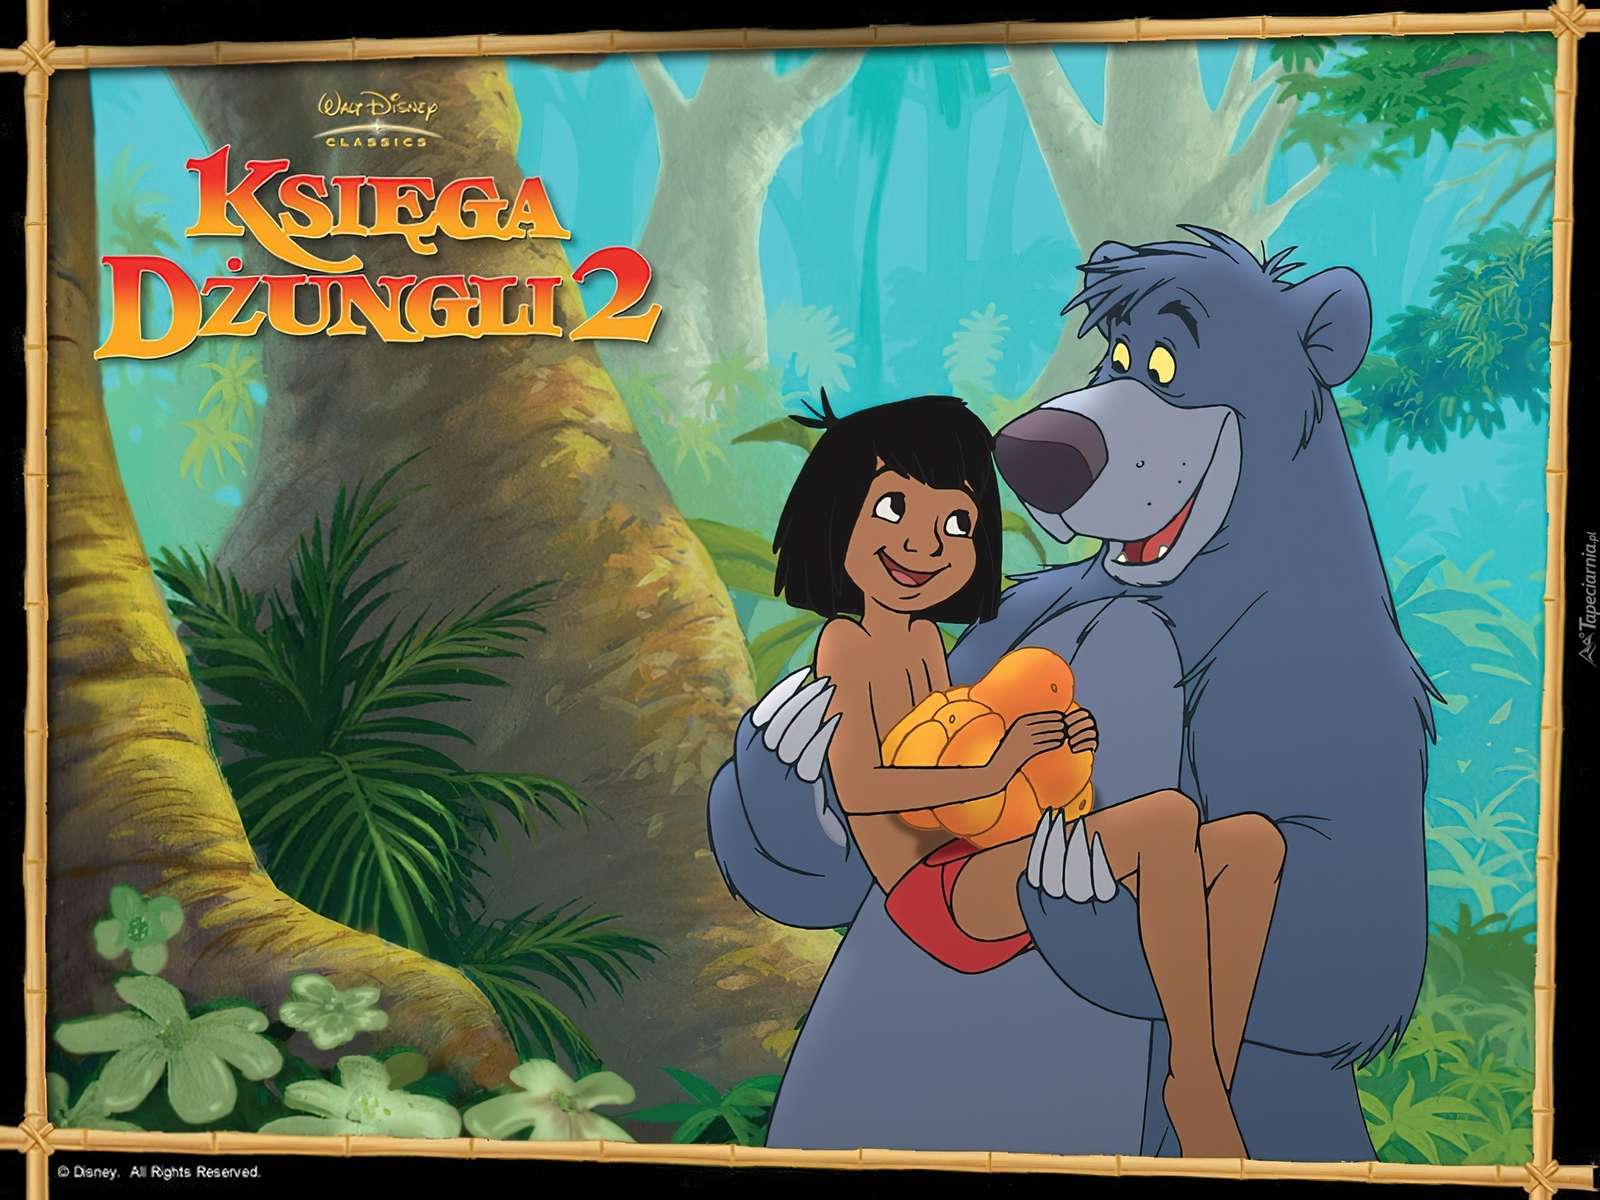 The Jungle Book online puzzle